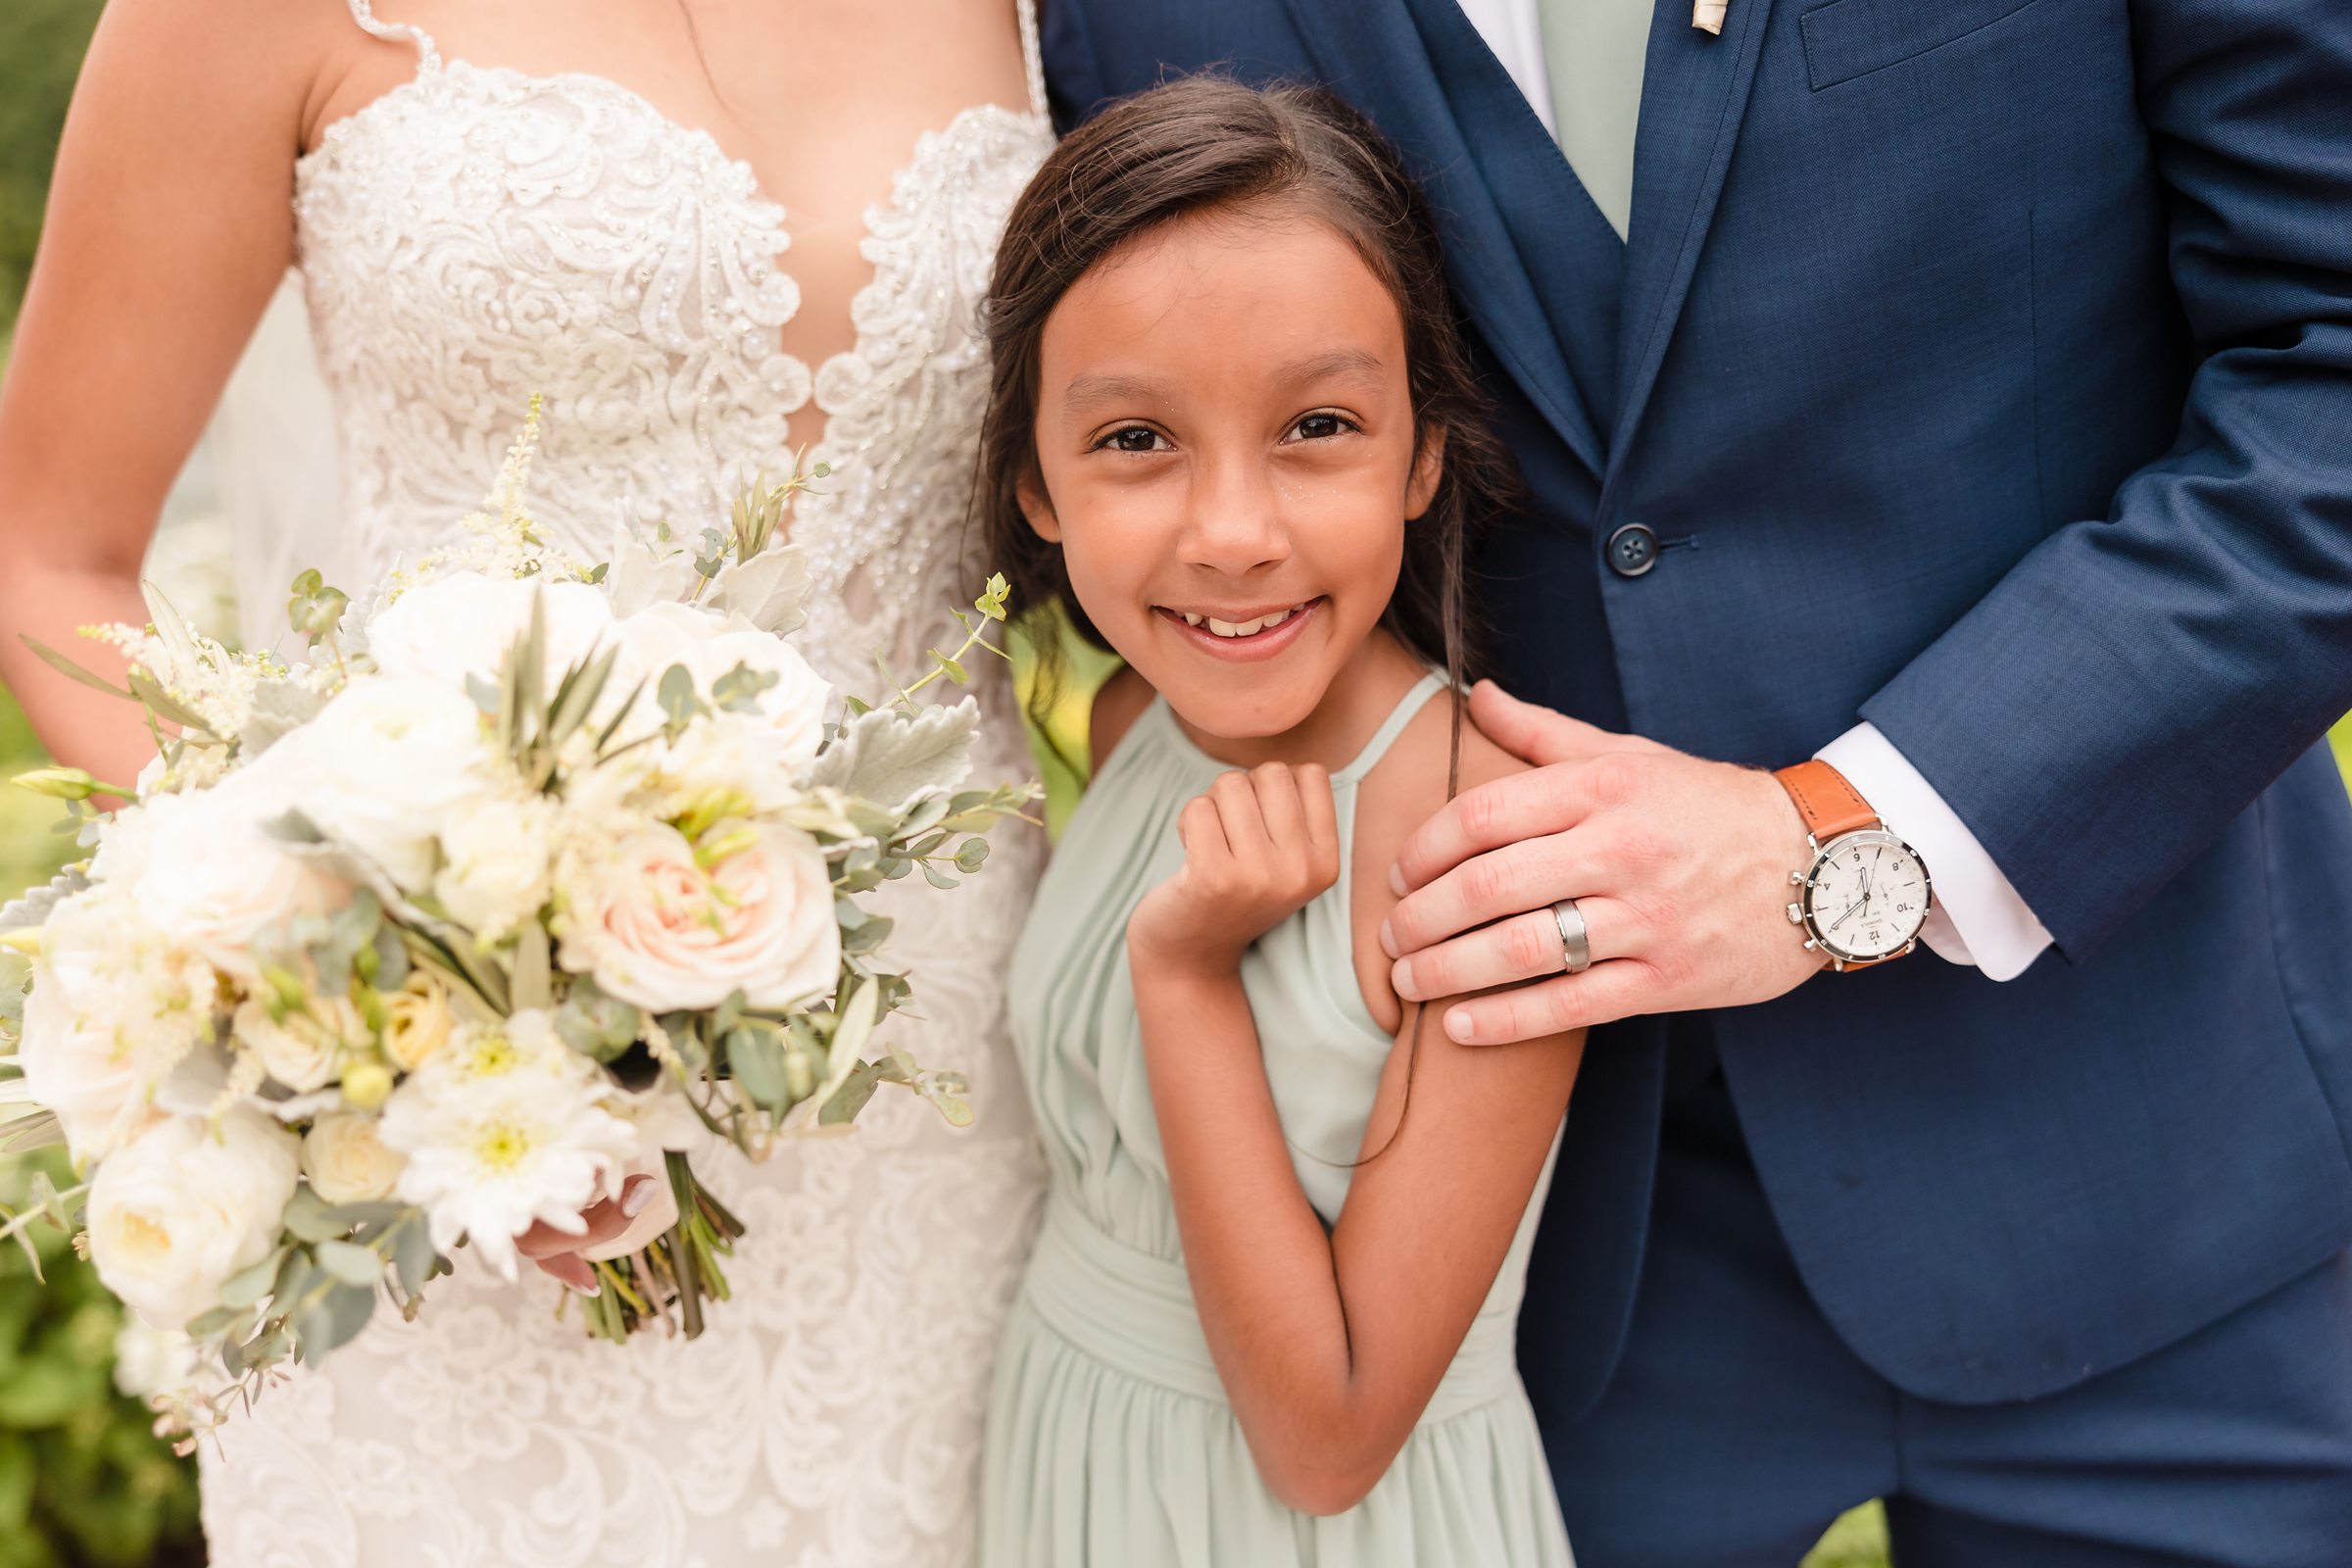 Bride and groom's daughter during their wedding at the Fisherman's Inn in Elburn, Illinois.